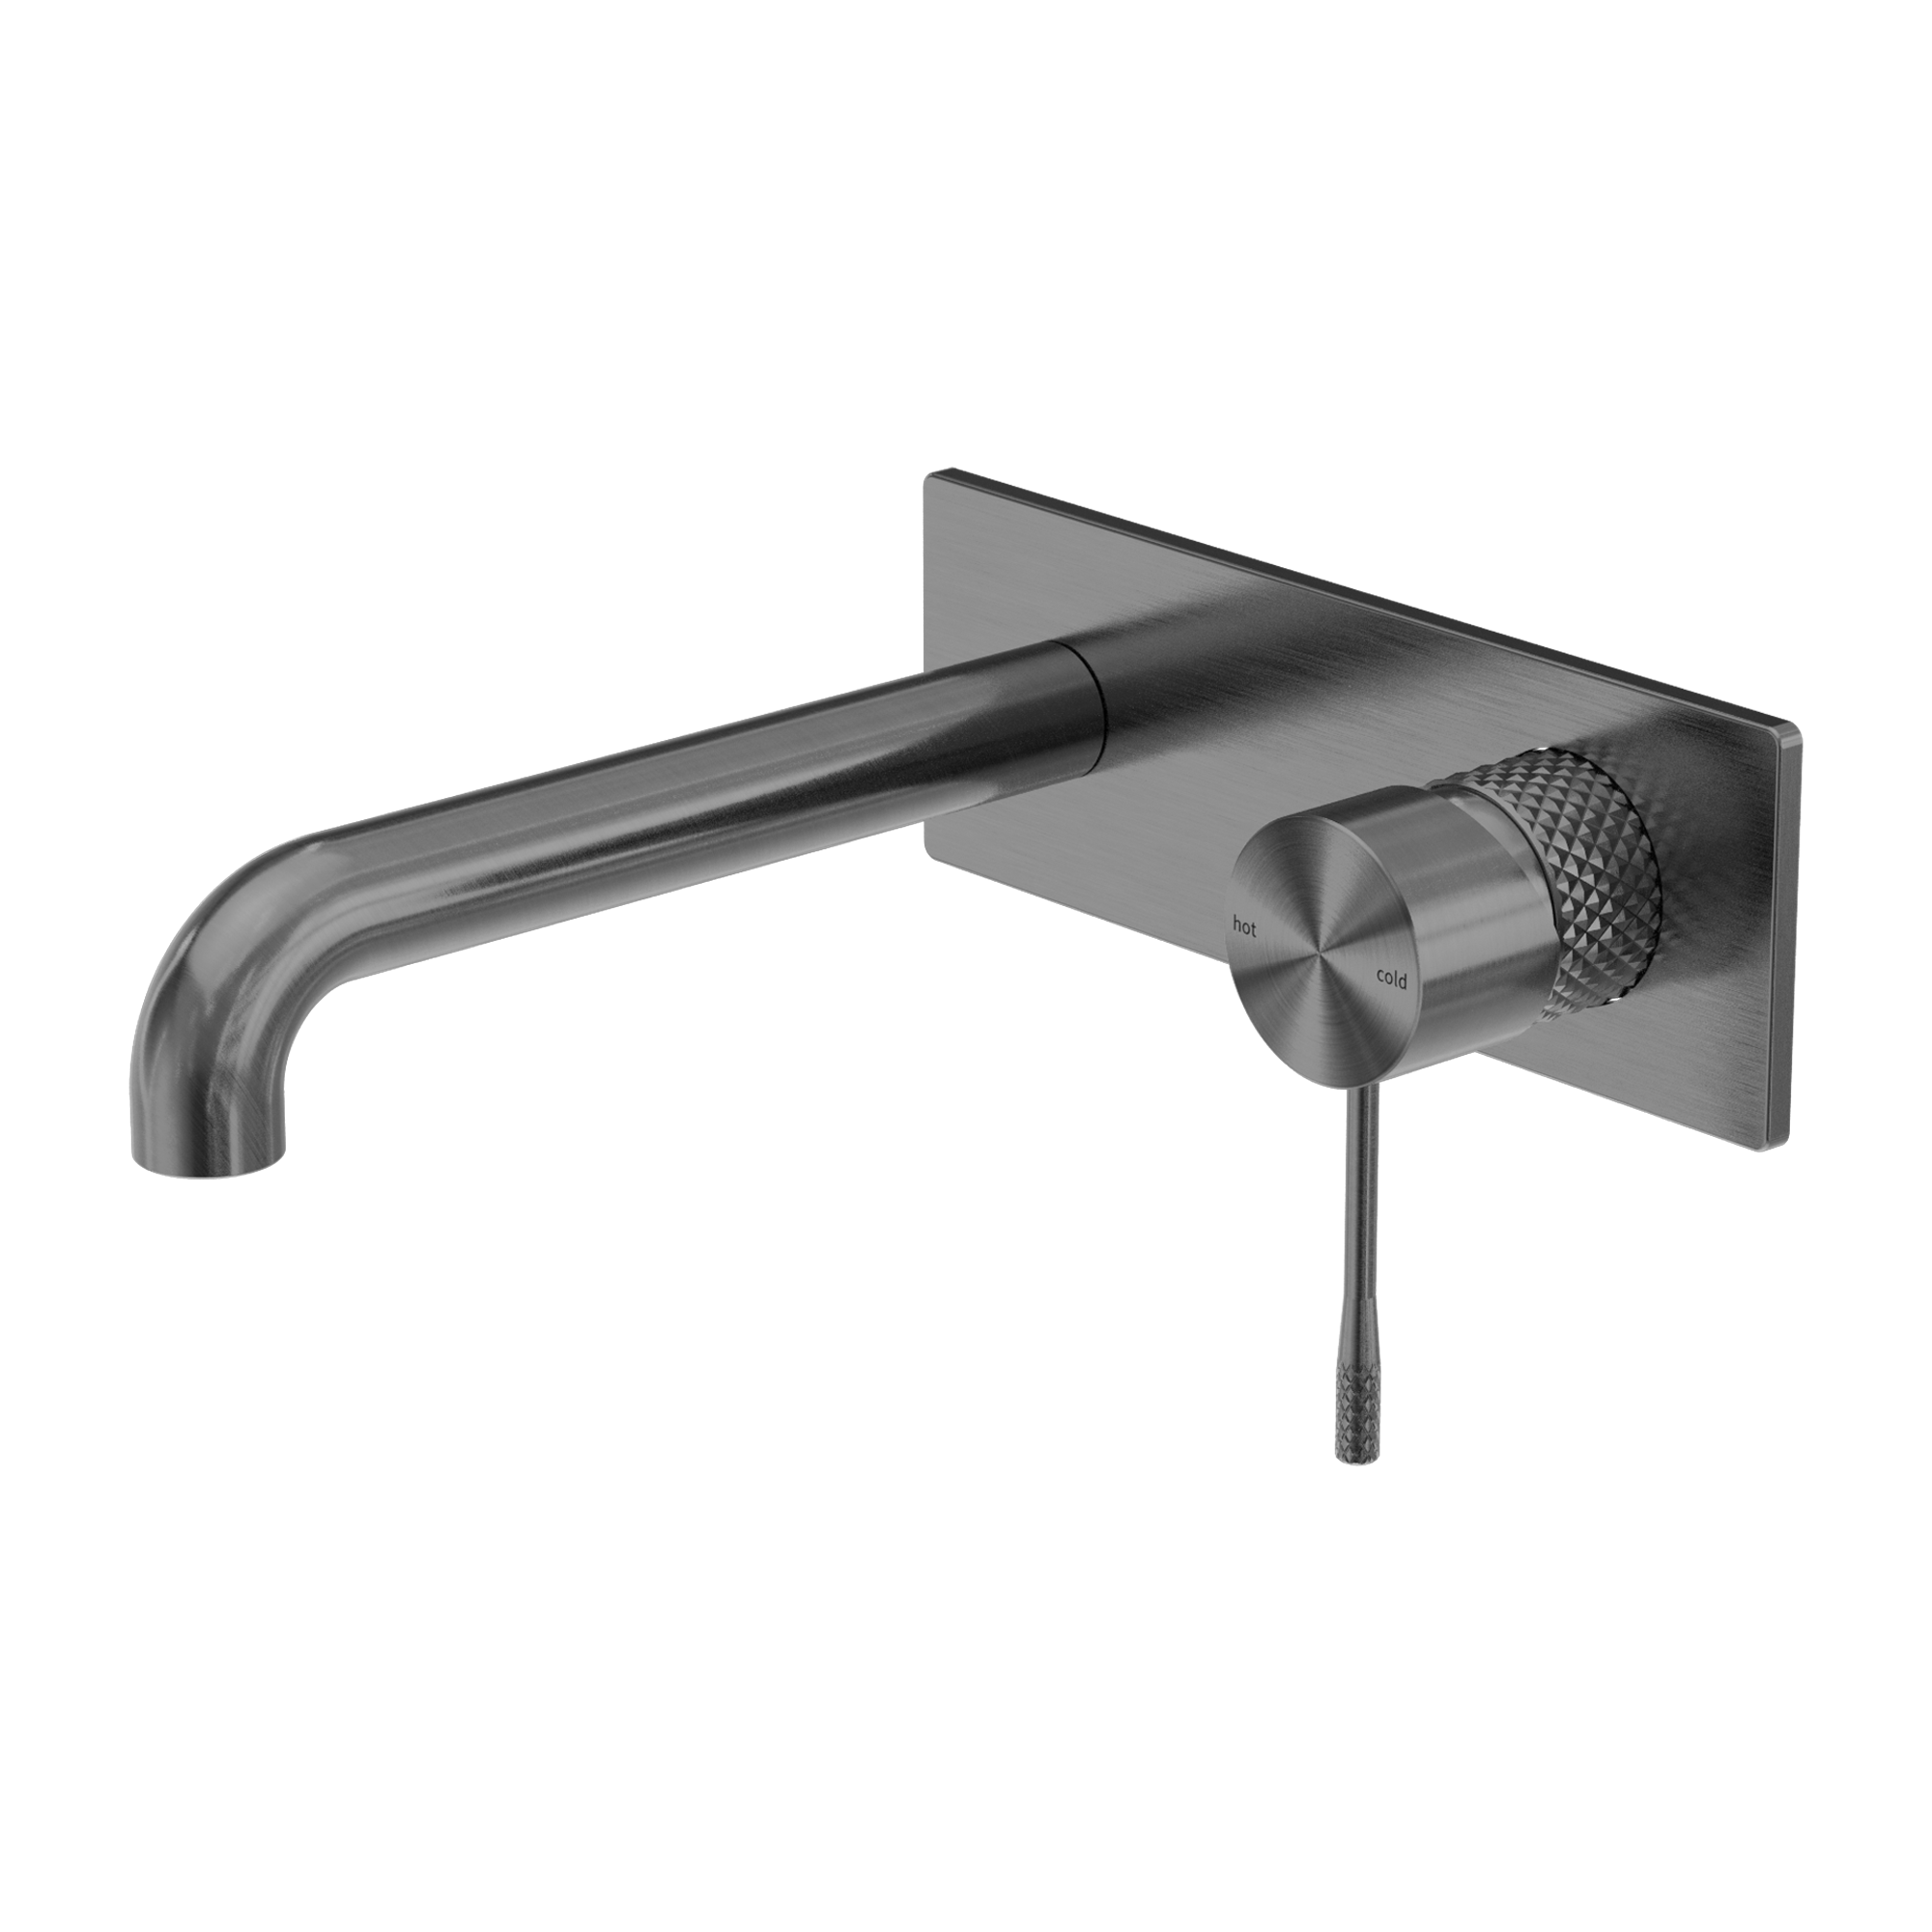 NERO OPAL WALL BASIN/ BATH MIXER GRAPHITE (AVAILABLE IN 120MM, 160MM, 185MM, 230MM AND 260MM)